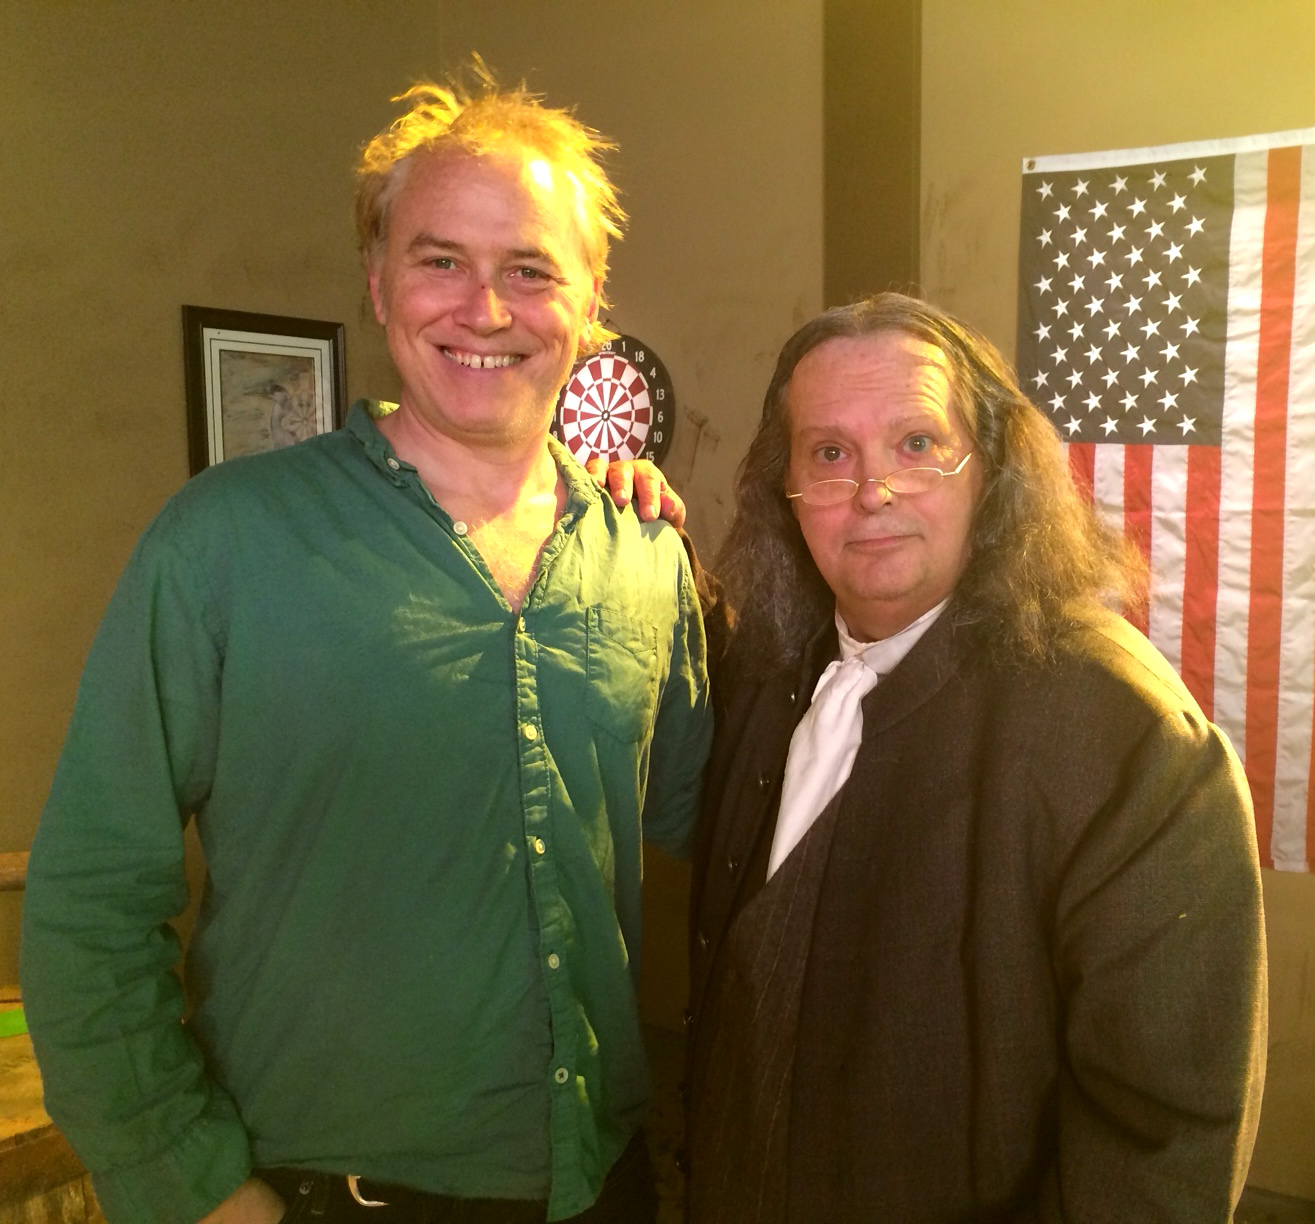 Standing next to producer Tom Stern, actor Michael Q. Schmidt appears as Benjamin Franklin in truTV's 